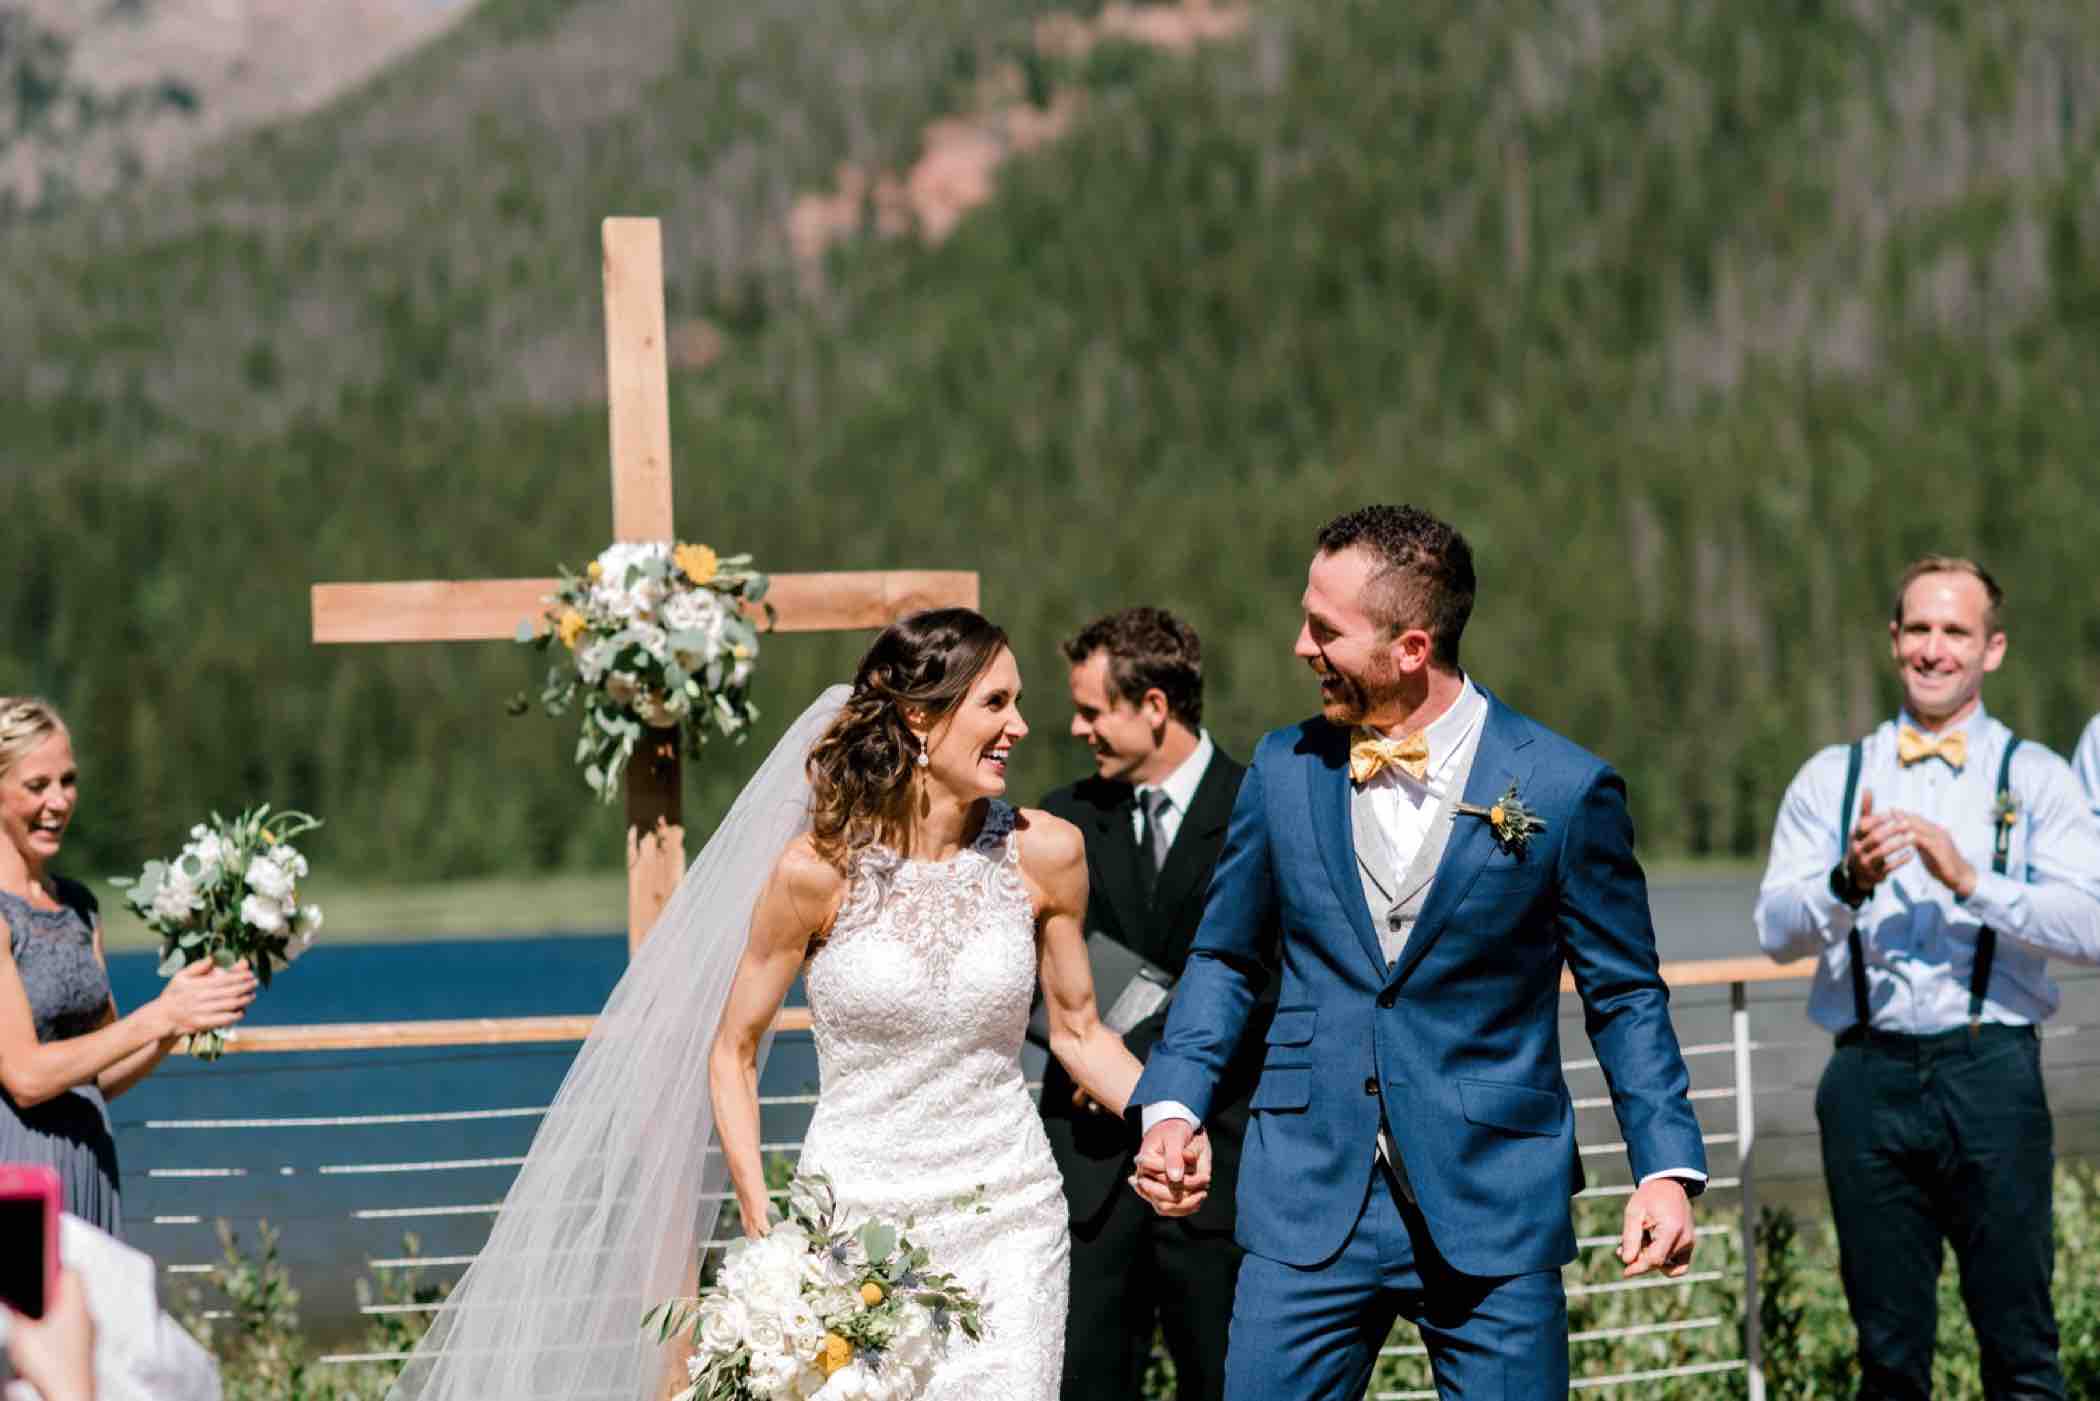 Bride and groom celebrate their wedding ceremony at Piney River Ranch in Vail in the Colorado Rocky Mountains. Photo by Ali and Garrett, Romantic, Adventurous, Nostalgic Wedding Photographers.